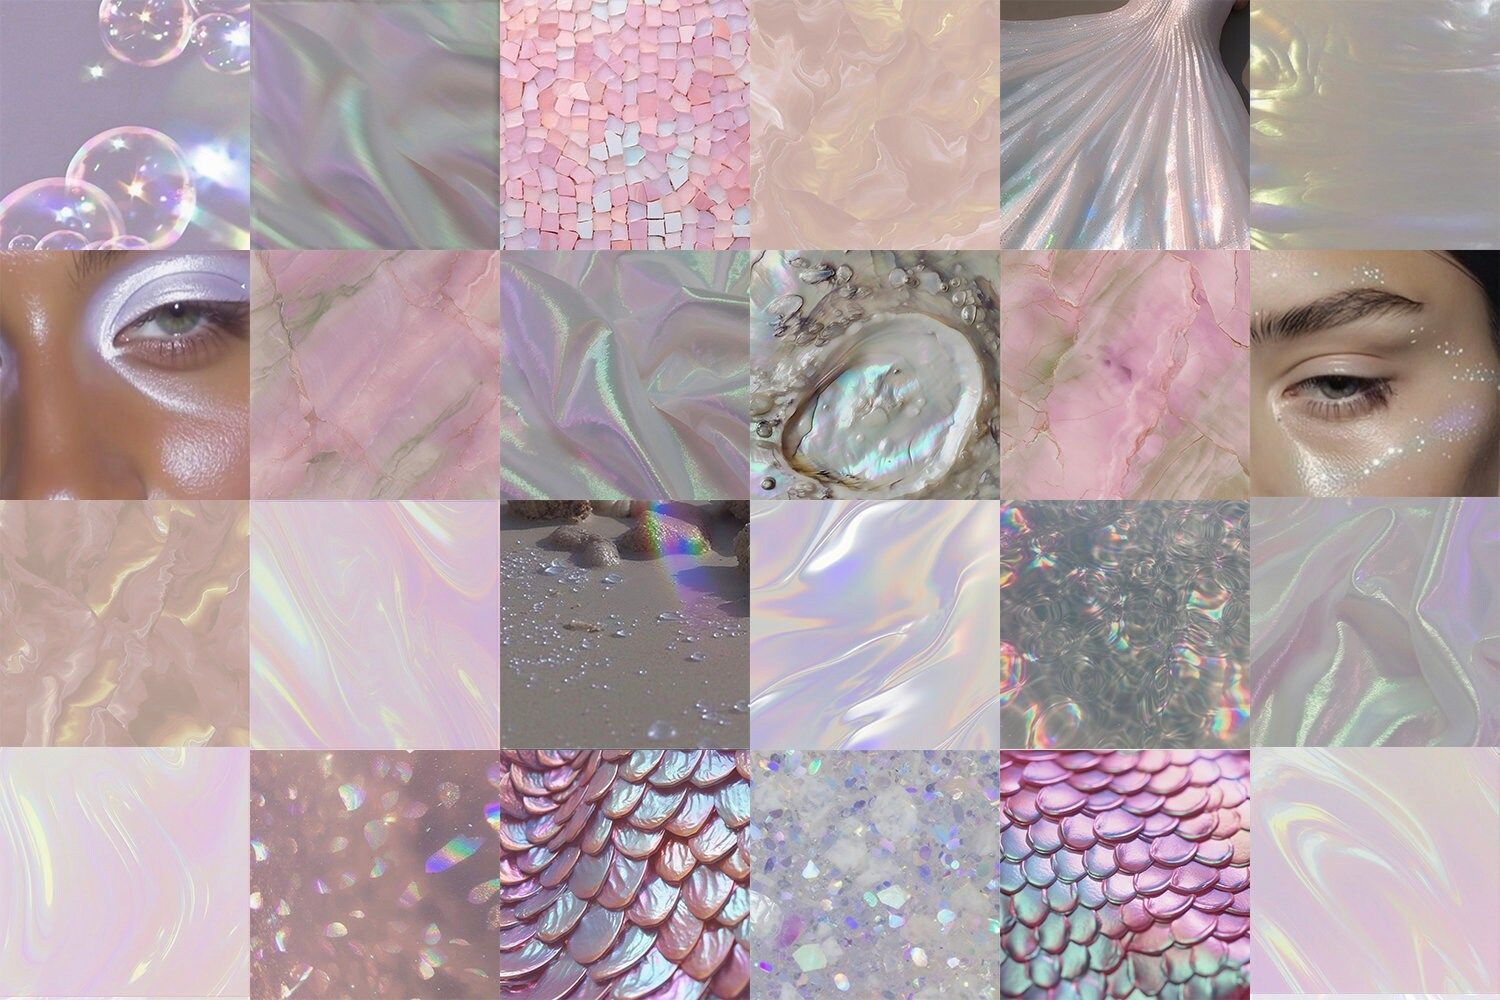 A collage of images featuring iridescent and holographic textures such as bubbles, scales, and glitter. The colors are soft and pastel, with a focus on pink and purple. The overall aesthetic is dreamy and otherworldly. - Iridescent, collage